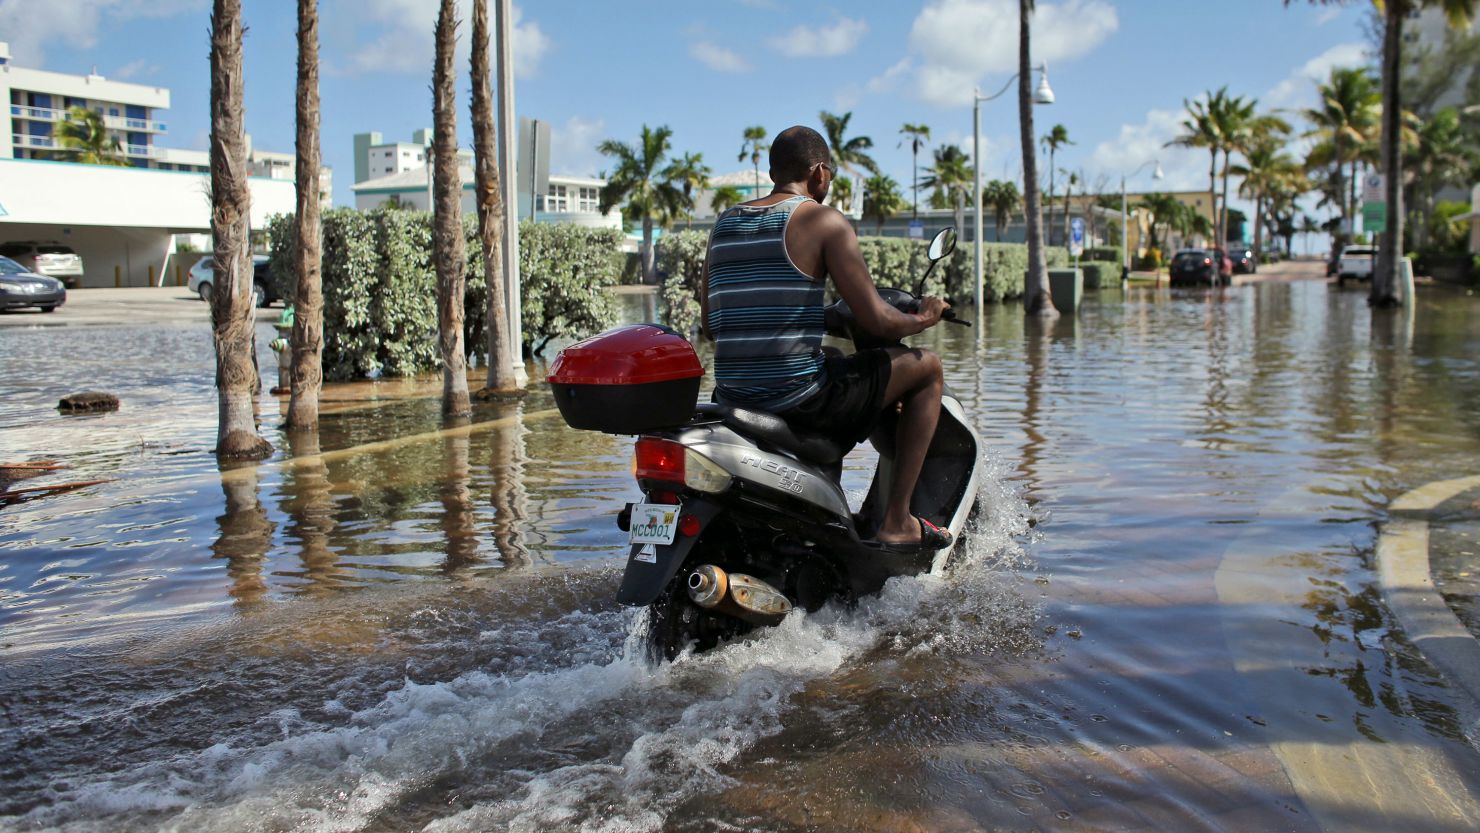 A man on a motorbike navigates through high-tide flooding in Hollywood, Florida, north of Miami.